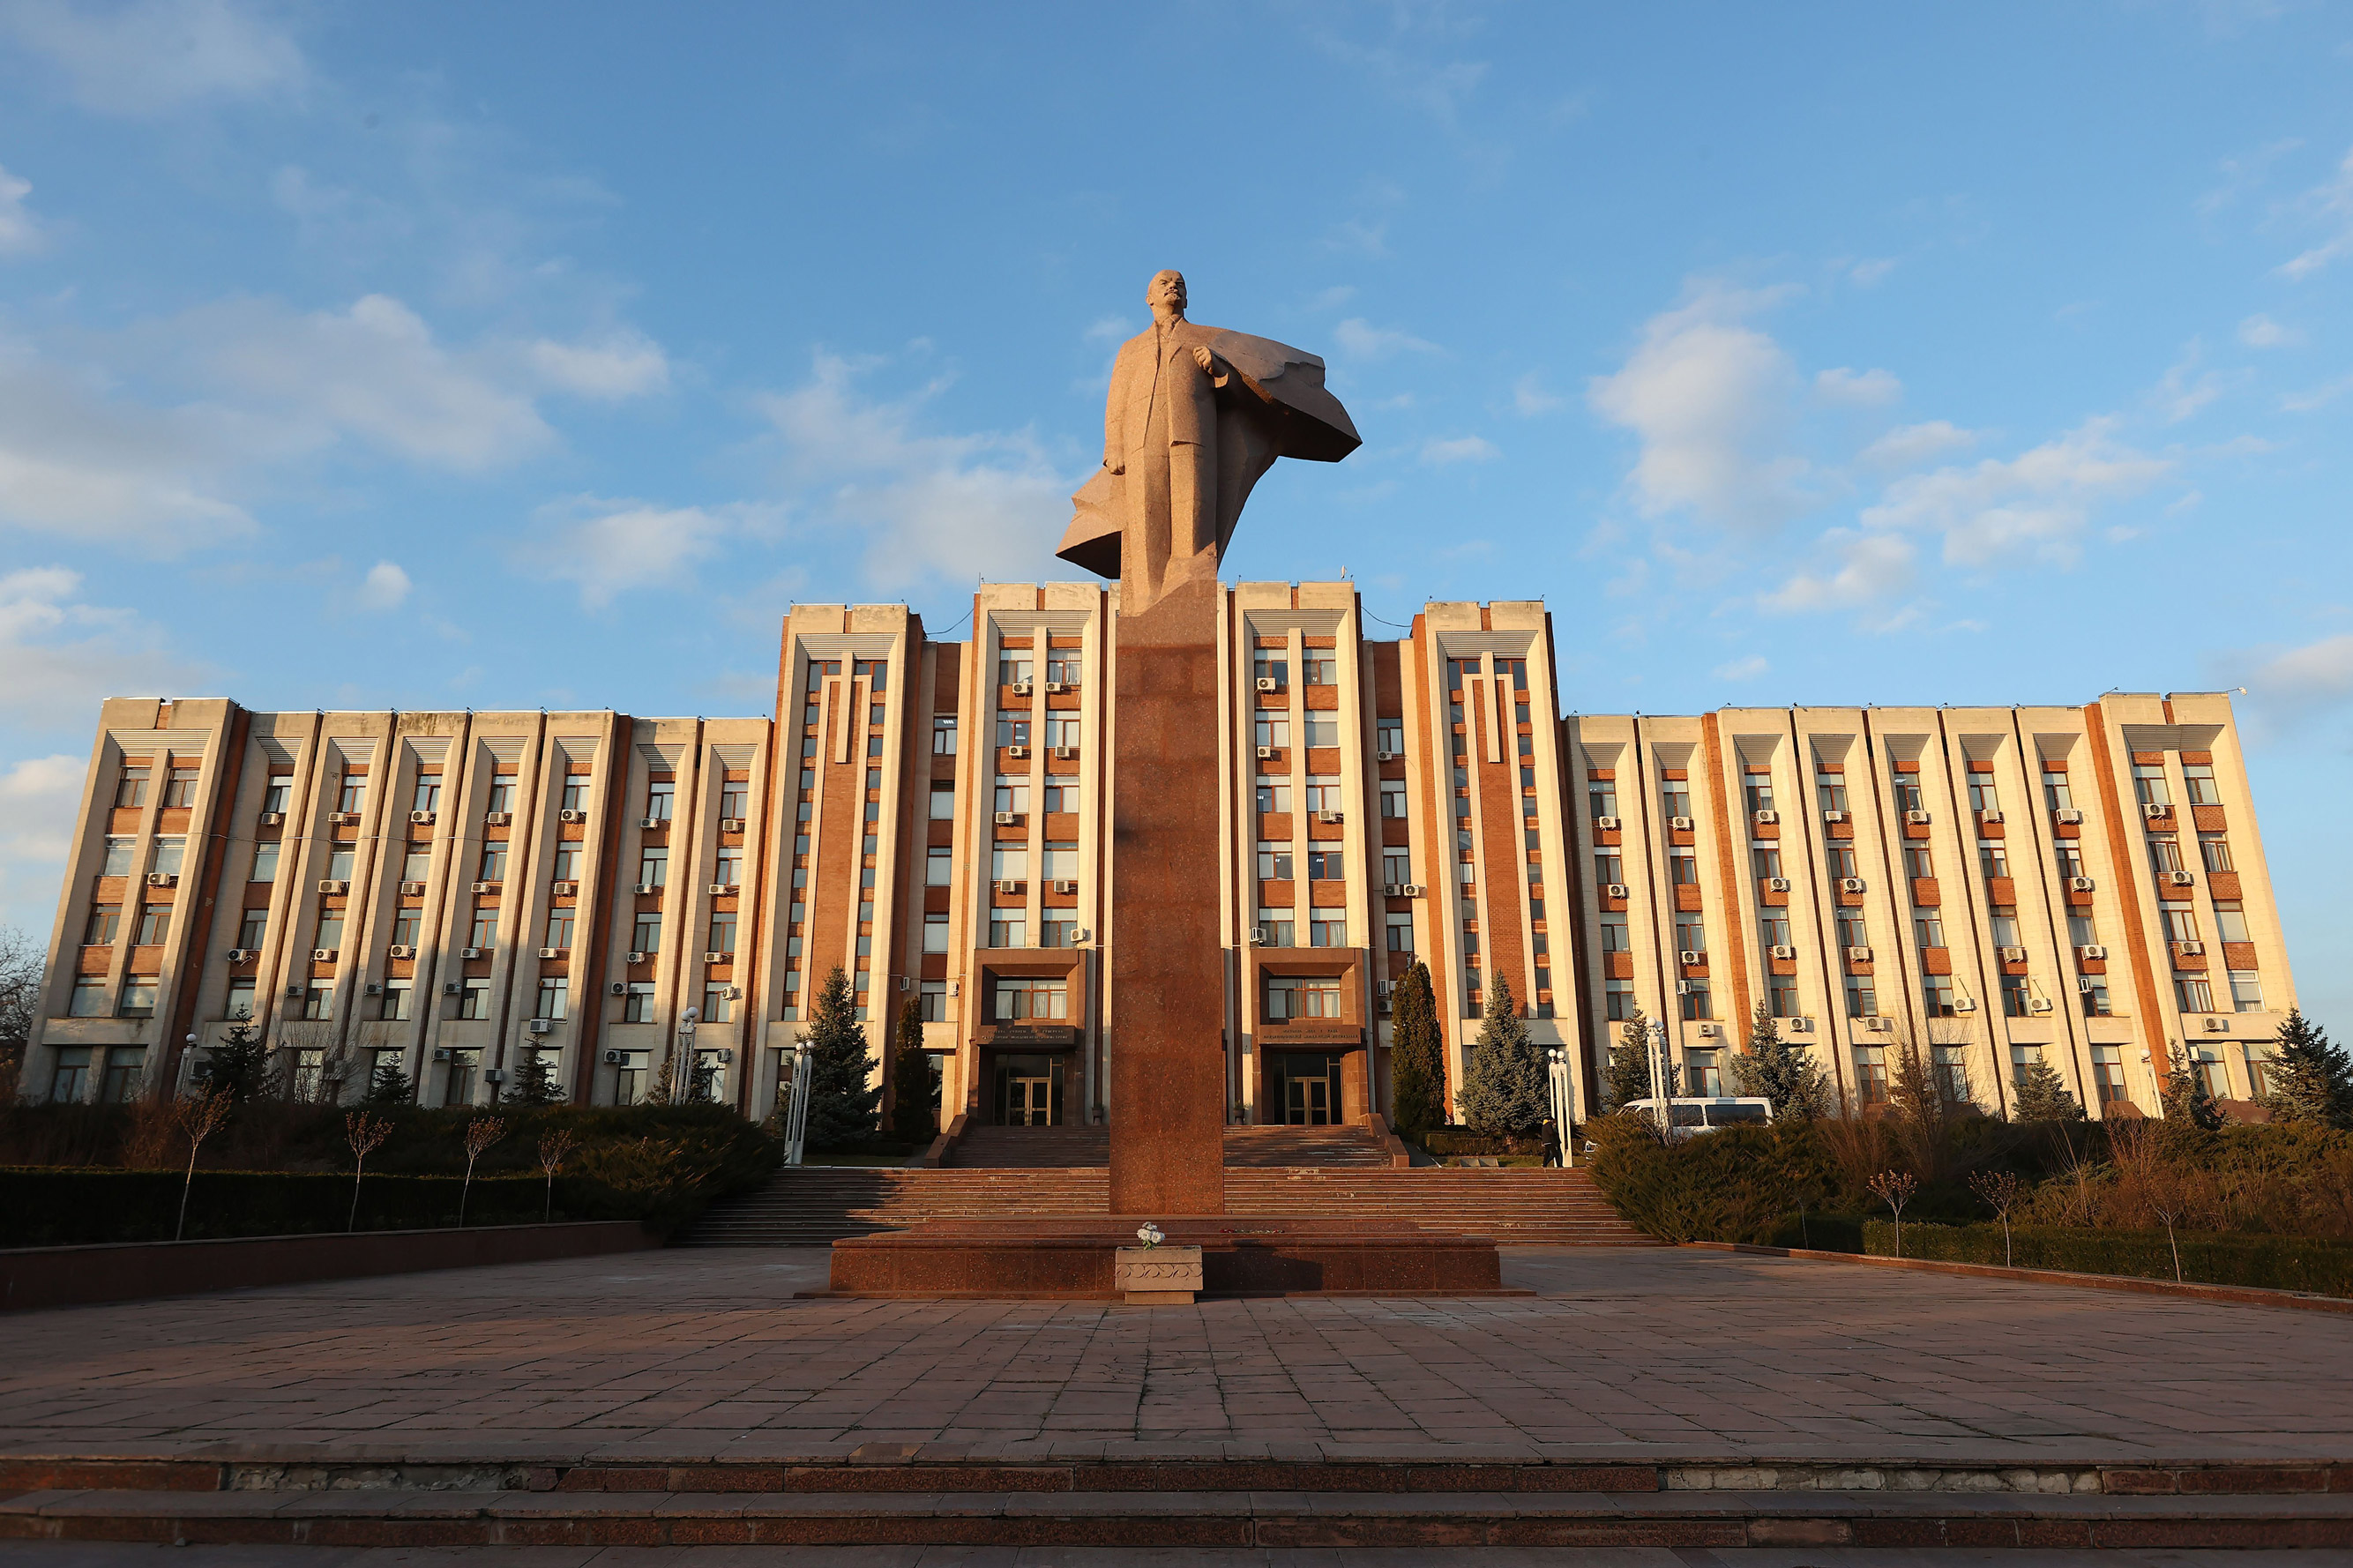 A view of the city council of Tiraspol, the capital of Transnistria, Moldova on November 25, 2021.